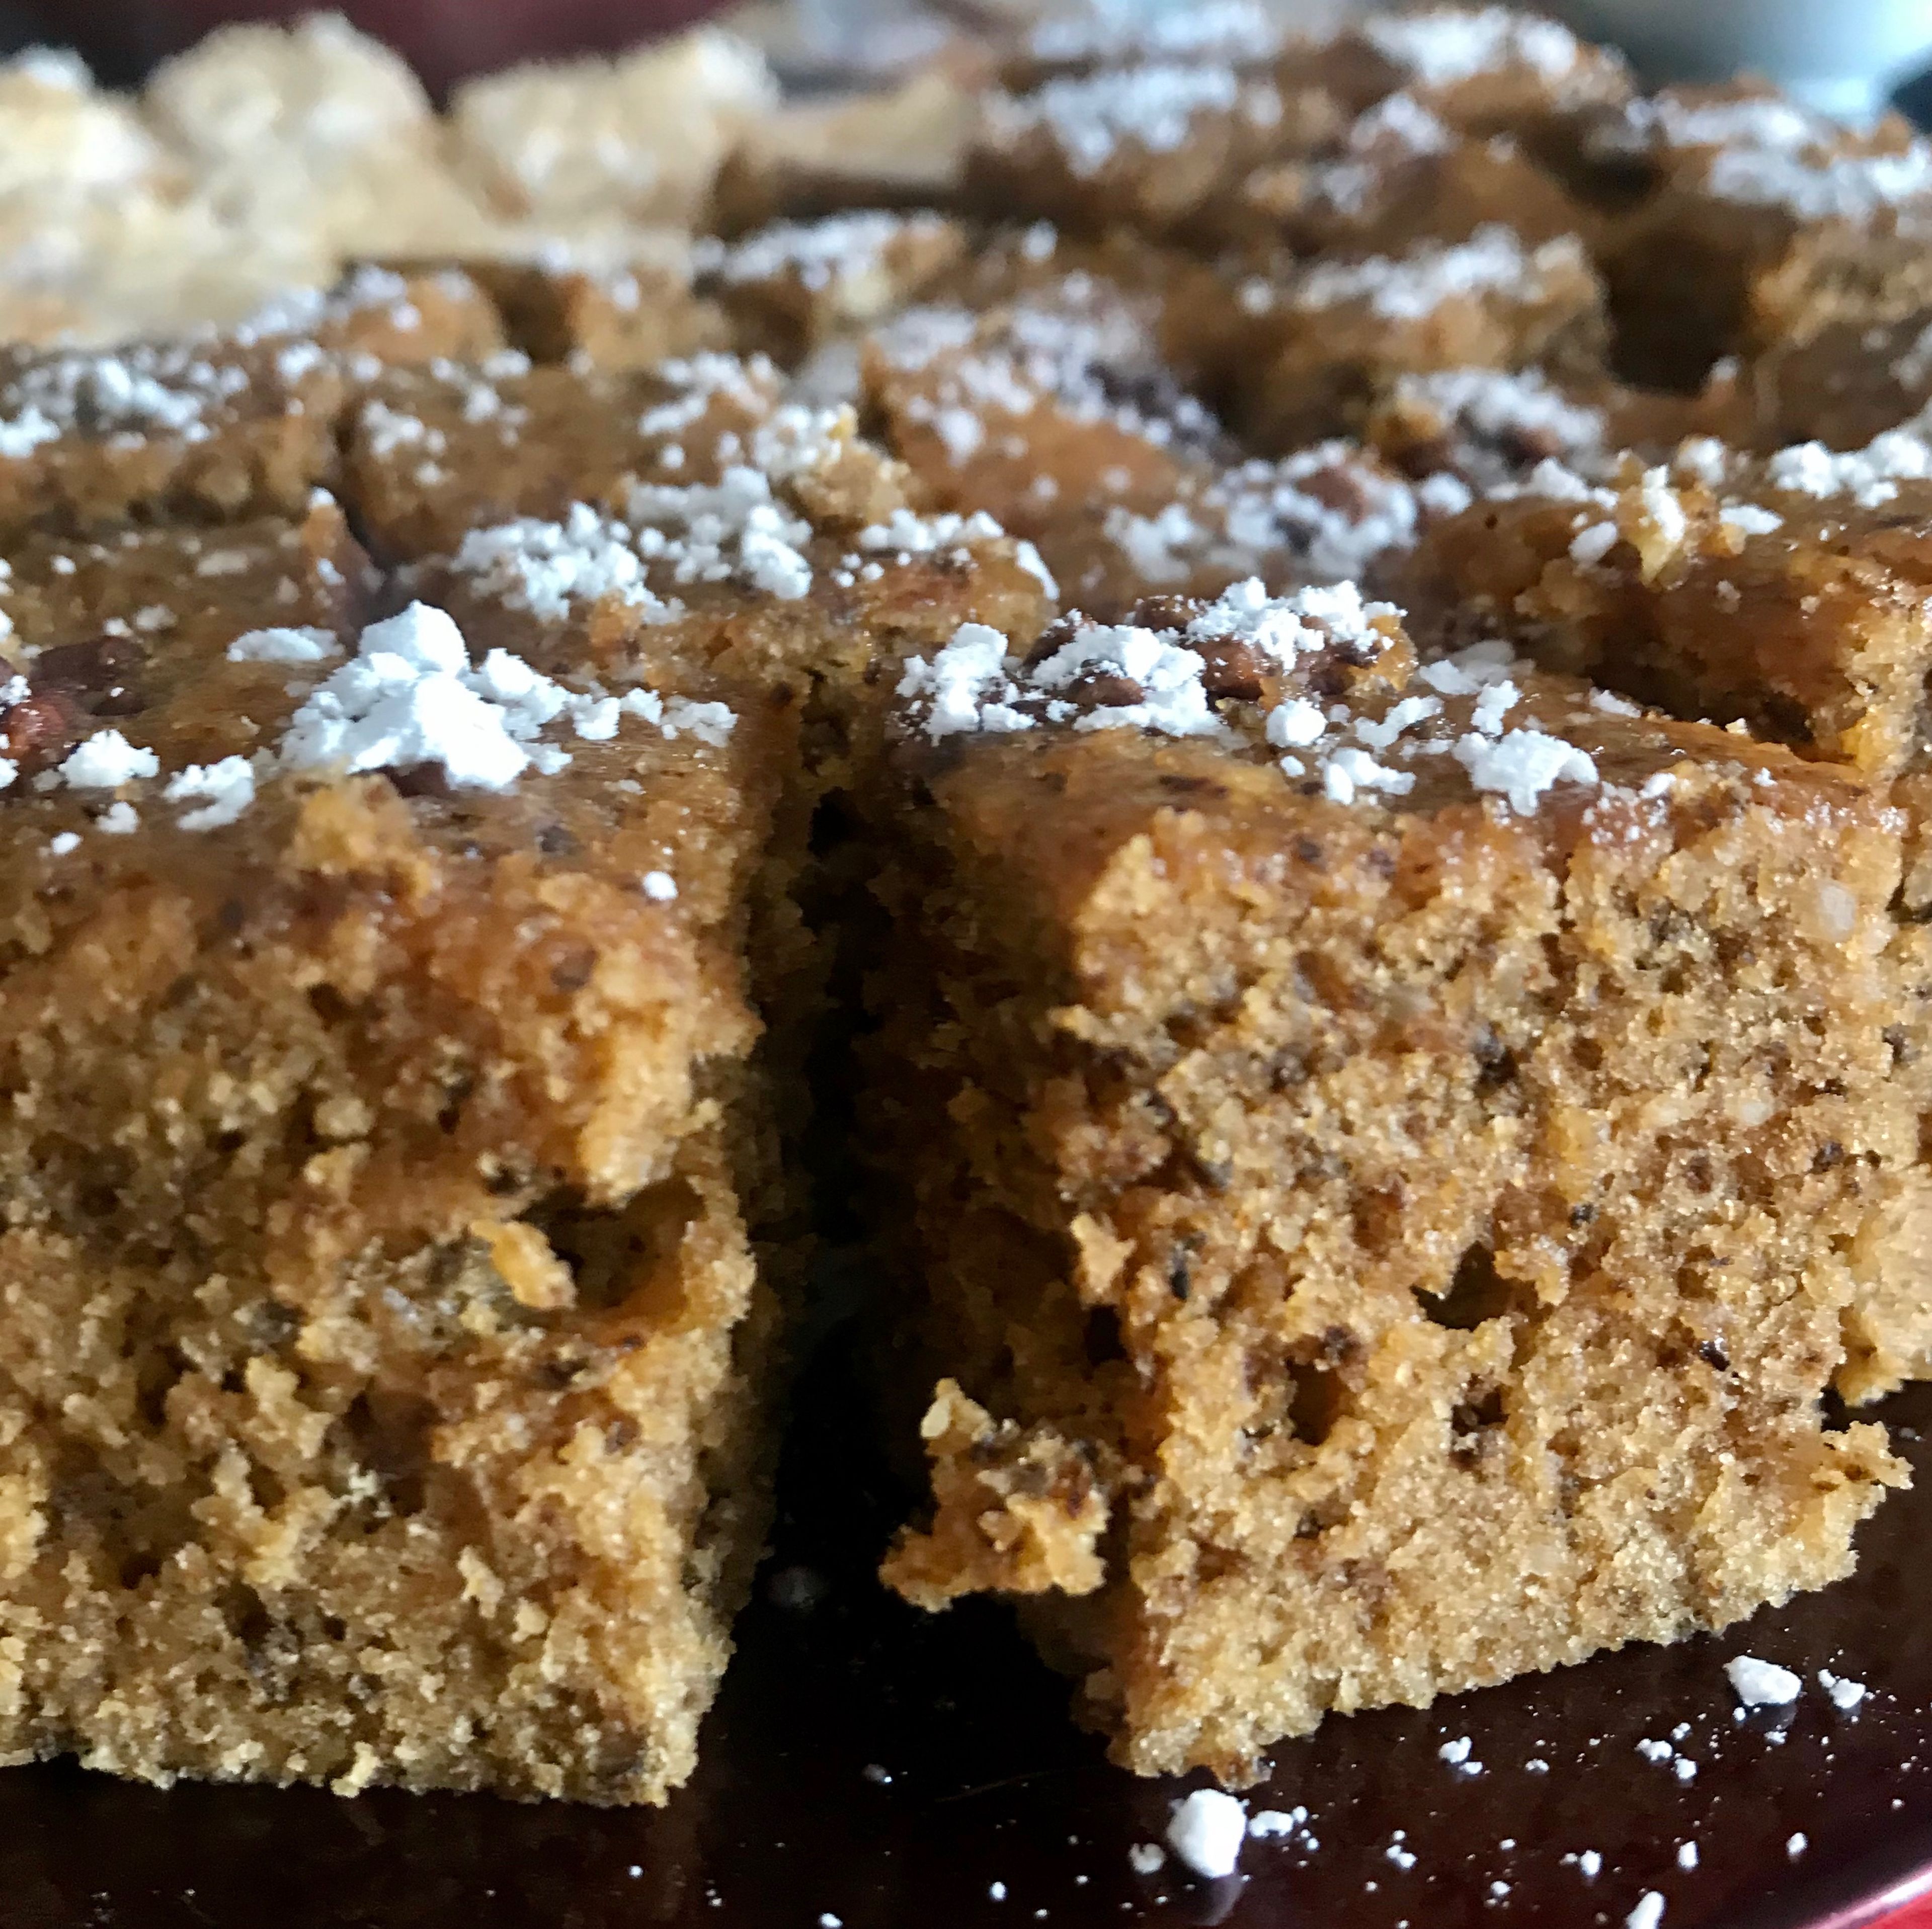 When cooled completely, cut the cake into squares and place on a plate, ready to serve. You can also top the cake squares with confectioner’s sugar, if you like.